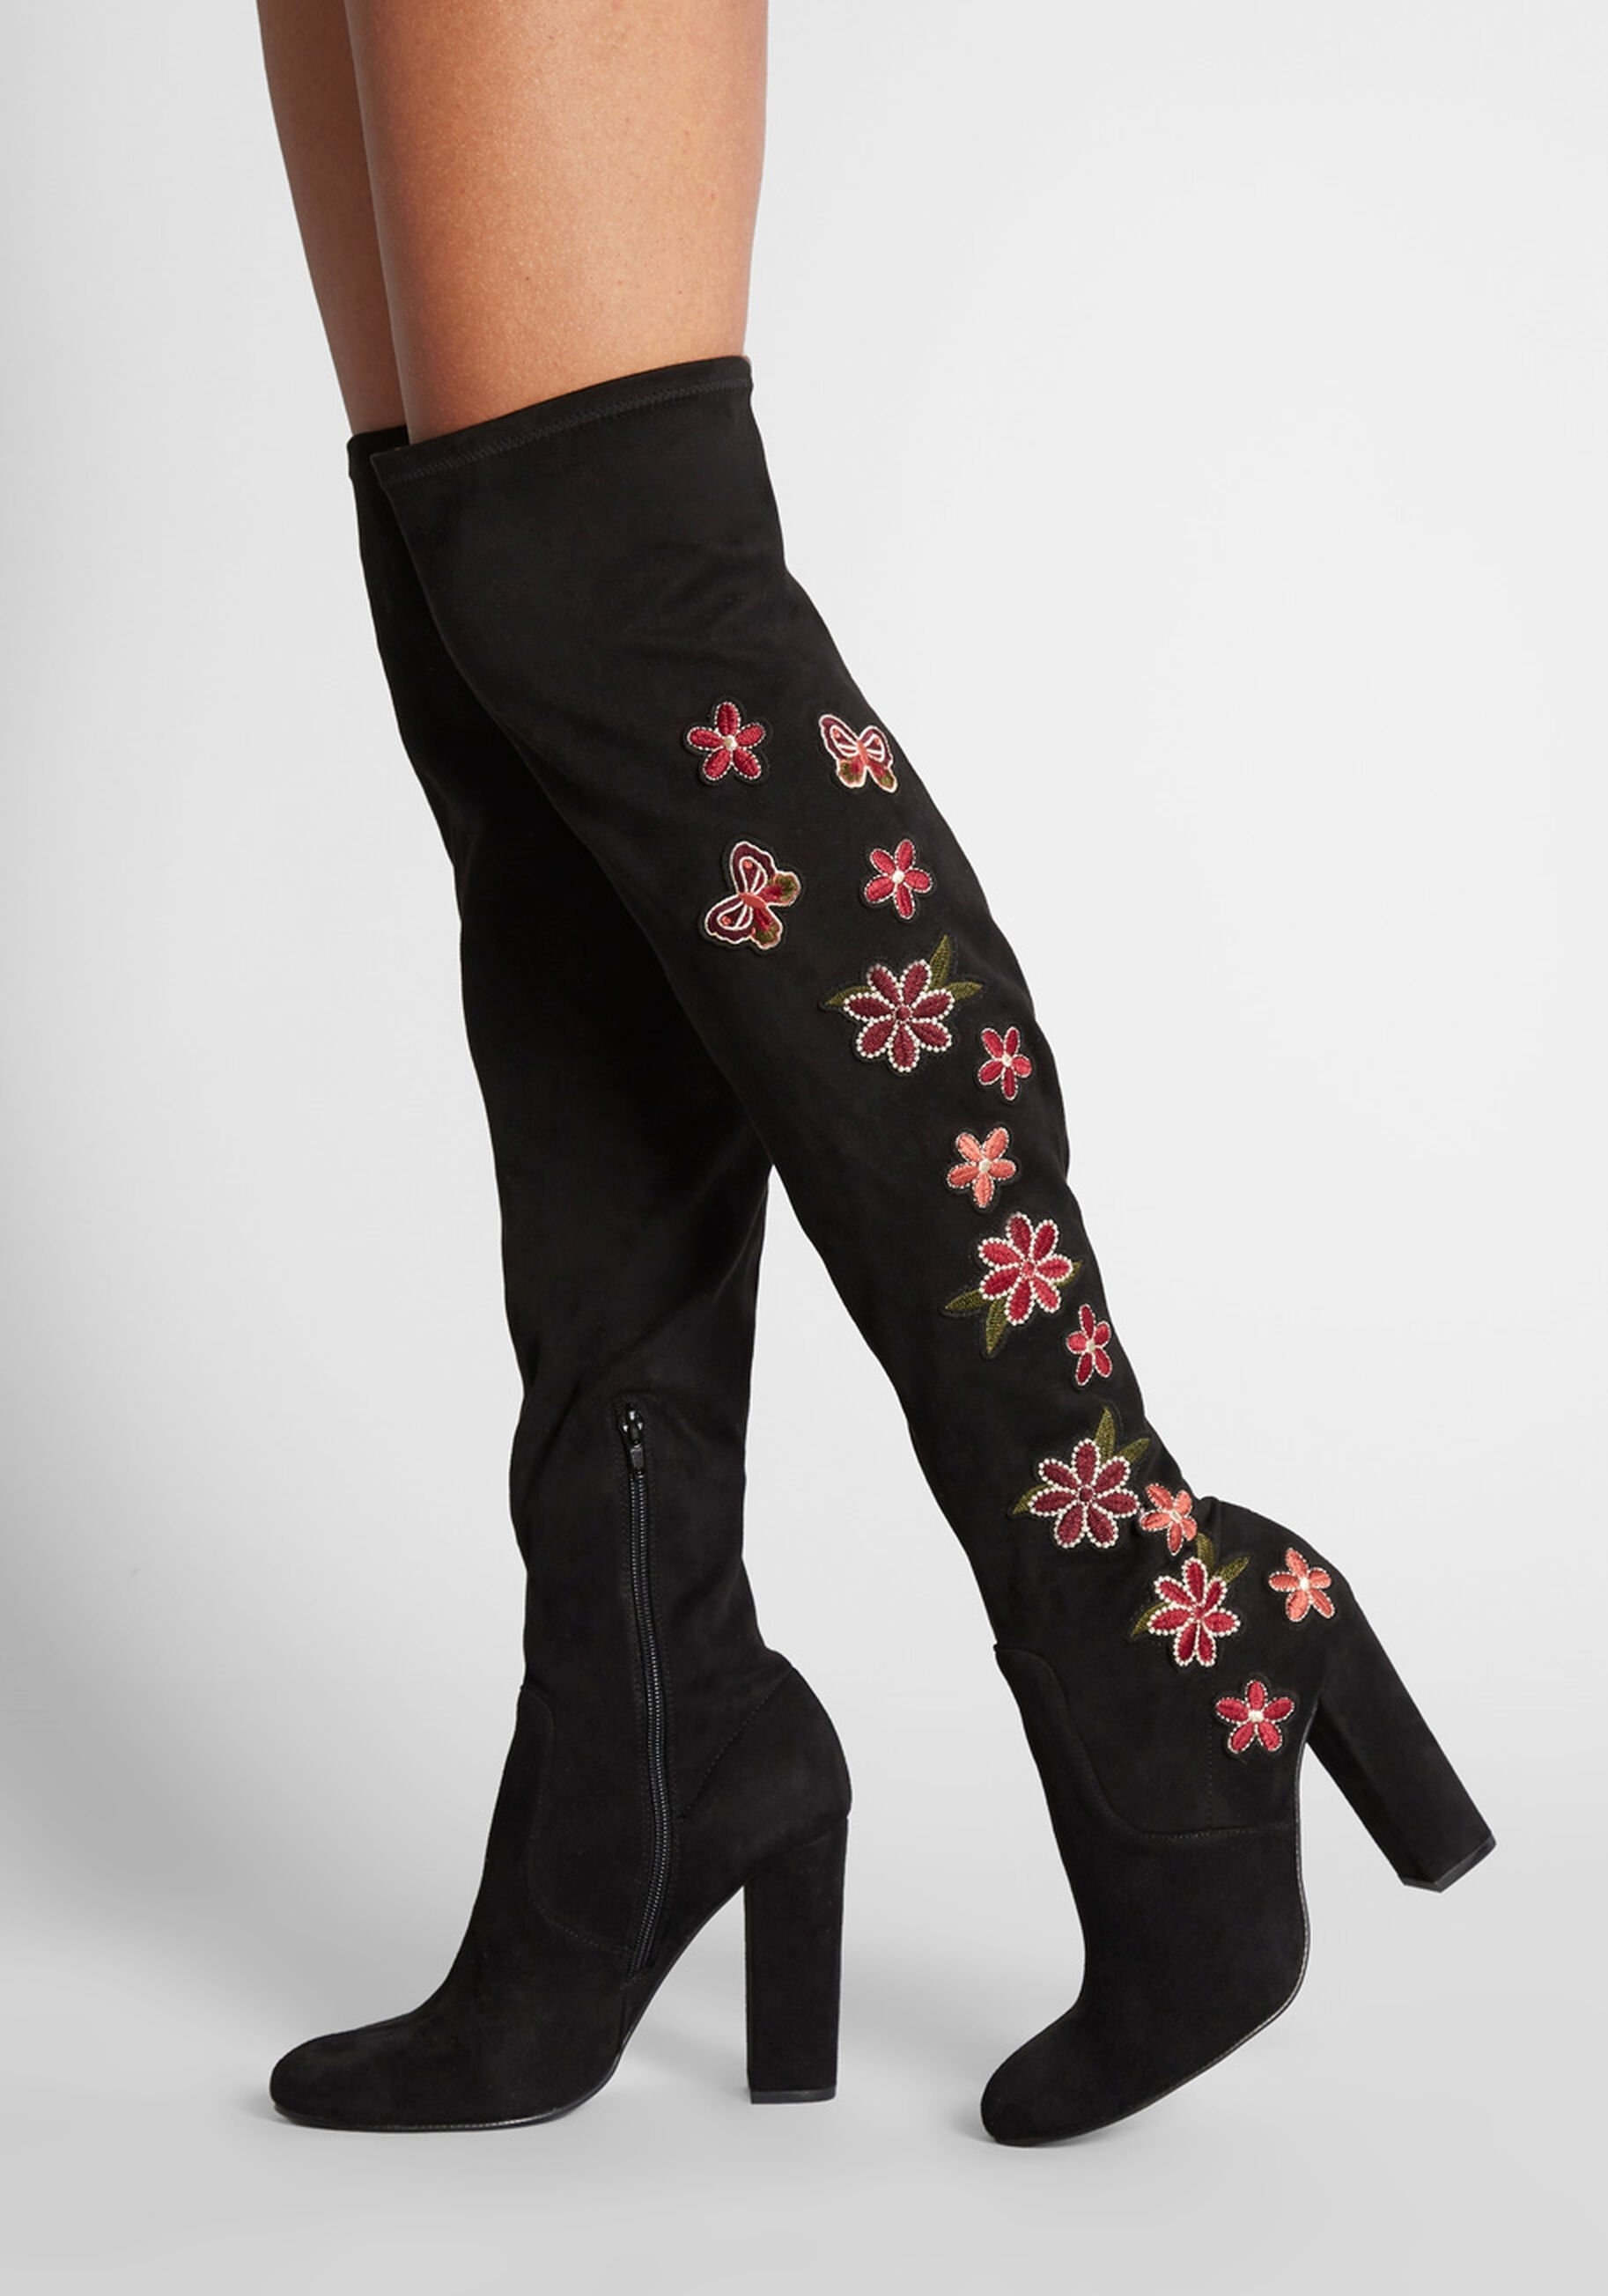 the black over the knee boots with a tall block heel and pink and purple flowers and butterflies along the sides